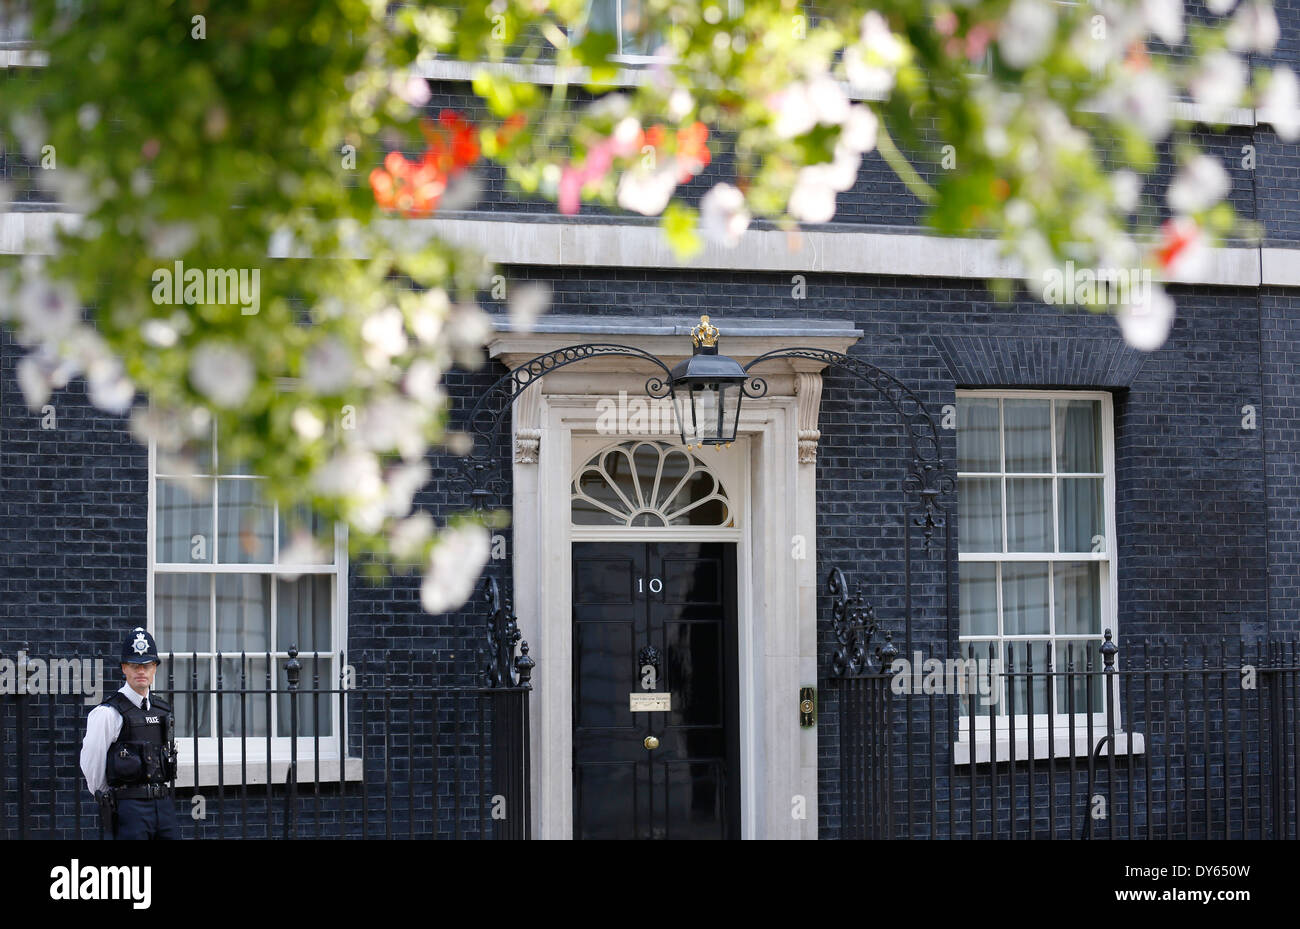 UK, London : Number 10 Downing Street, Home of British Prime Minister, is pictured on a sunny day in London. Stock Photo